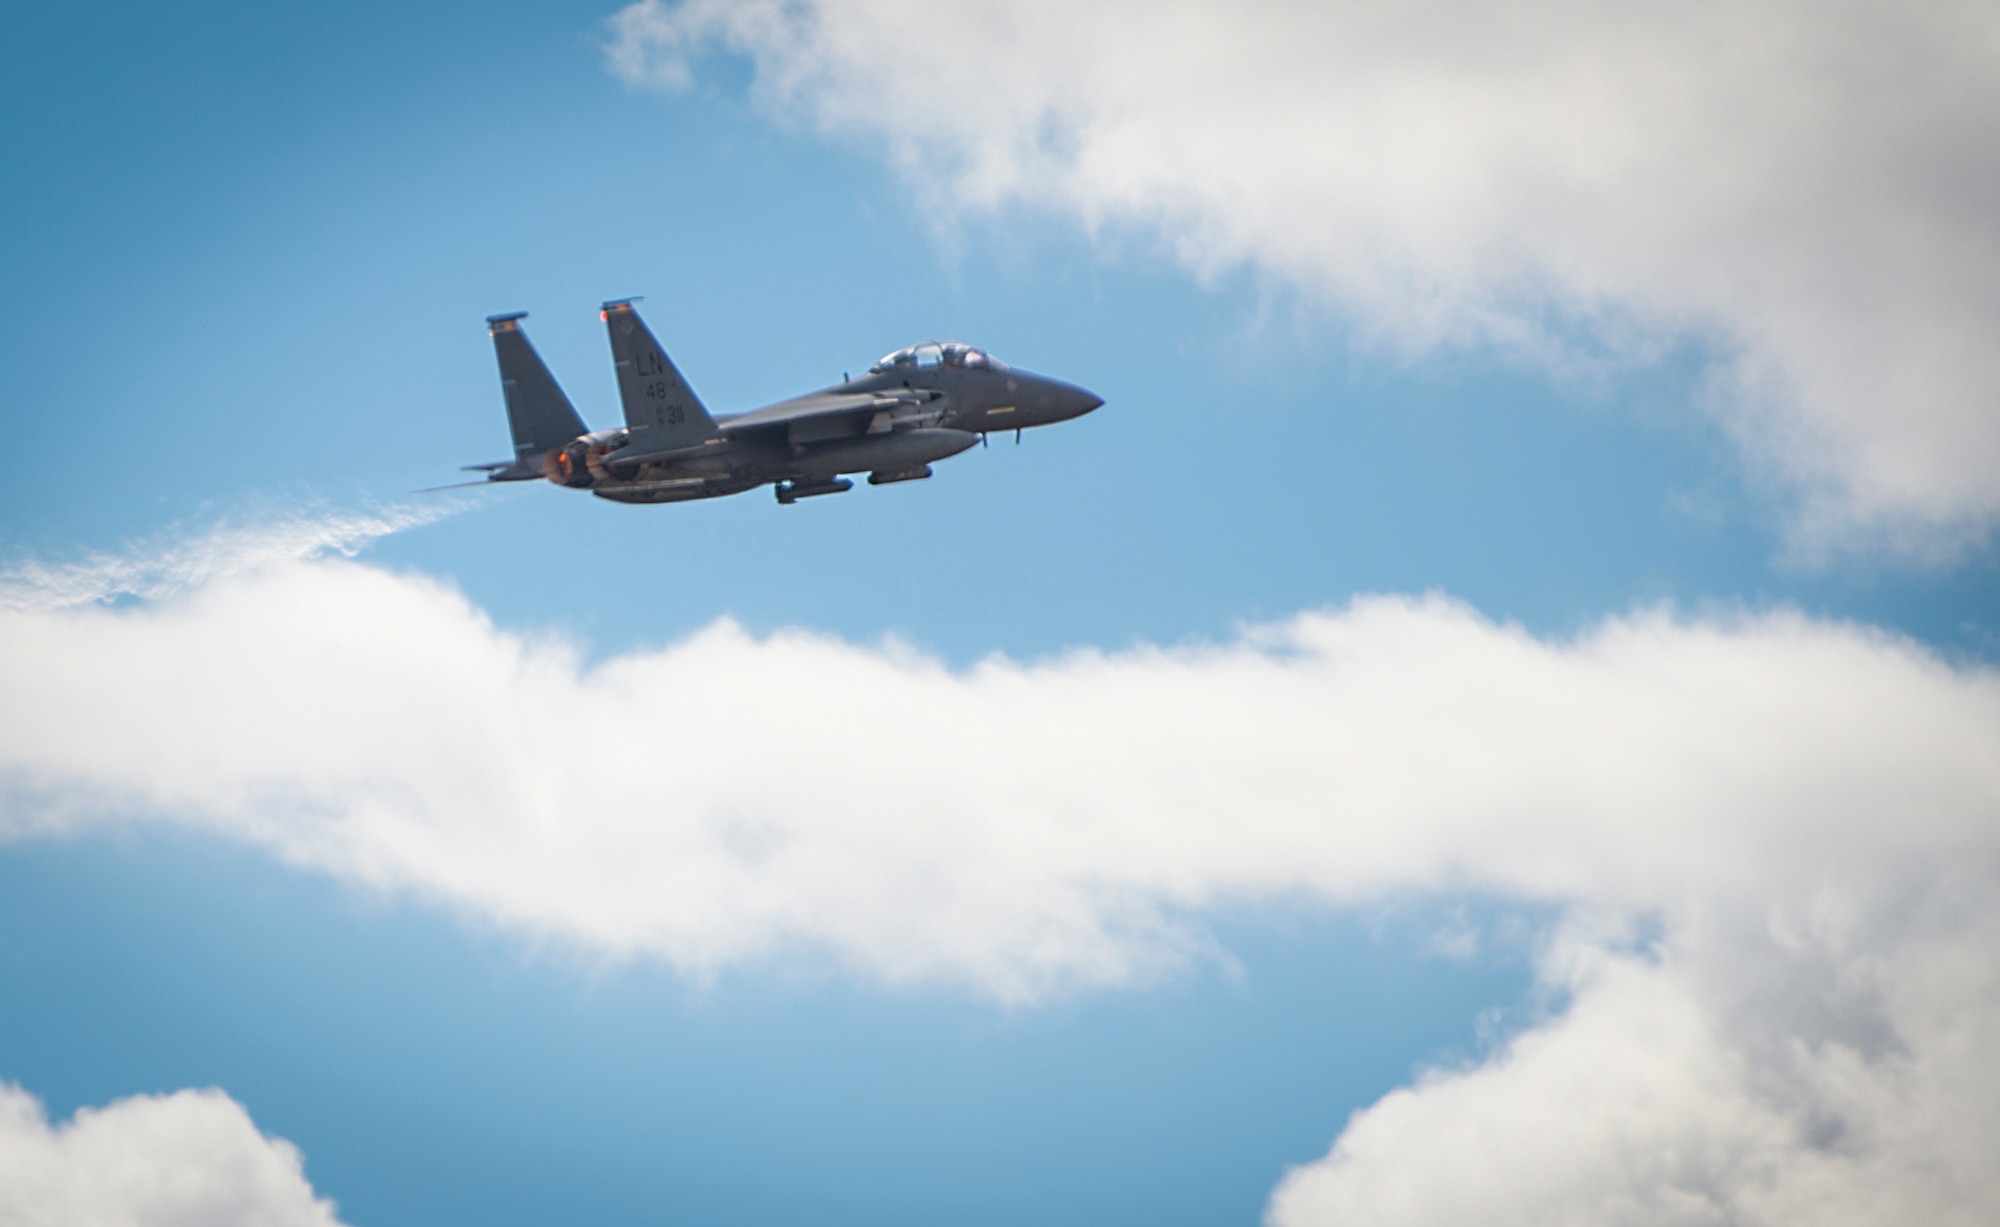 An F-15E Strike Eagle takes off for a sortie in support of Tactical Leadership Programme 16-3 at Los Llanos Air Base, Spain Sep. 14, 2016. The training prepares NATO and allied forces’ flight leaders to be mission commanders, lead coalition force air strike packages, instruct allied flying and non-flying personnel in matters related to tactical composite air operations, and provide tactical air expertise to NATO agencies. (U.S. Air Force photo/ Staff Sgt. Emerson Nuñez)